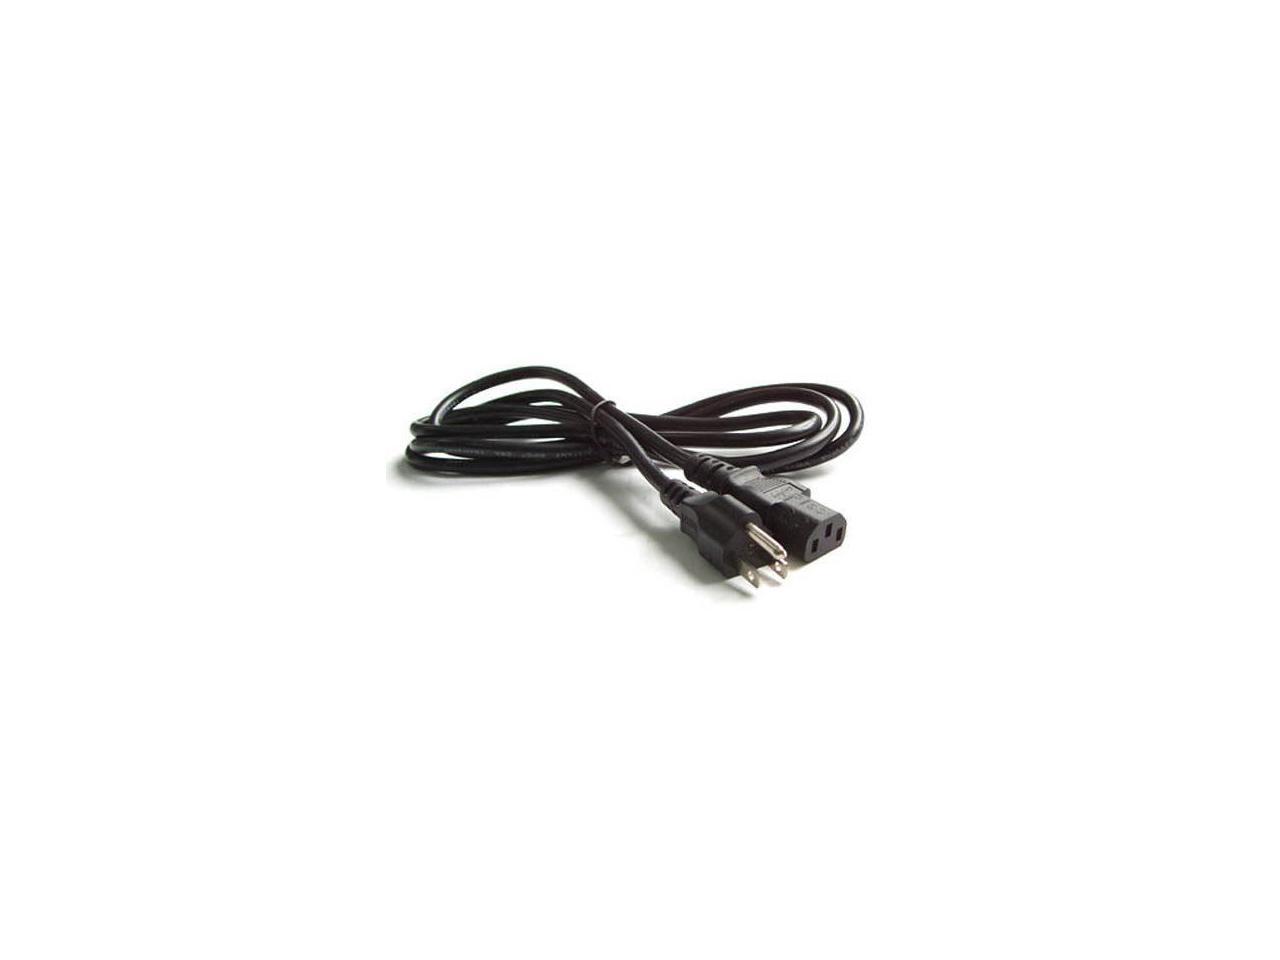 AC Power Supply Cord Cable for HP Color Laserjet Pro MFP M476nw M476dn Printer 